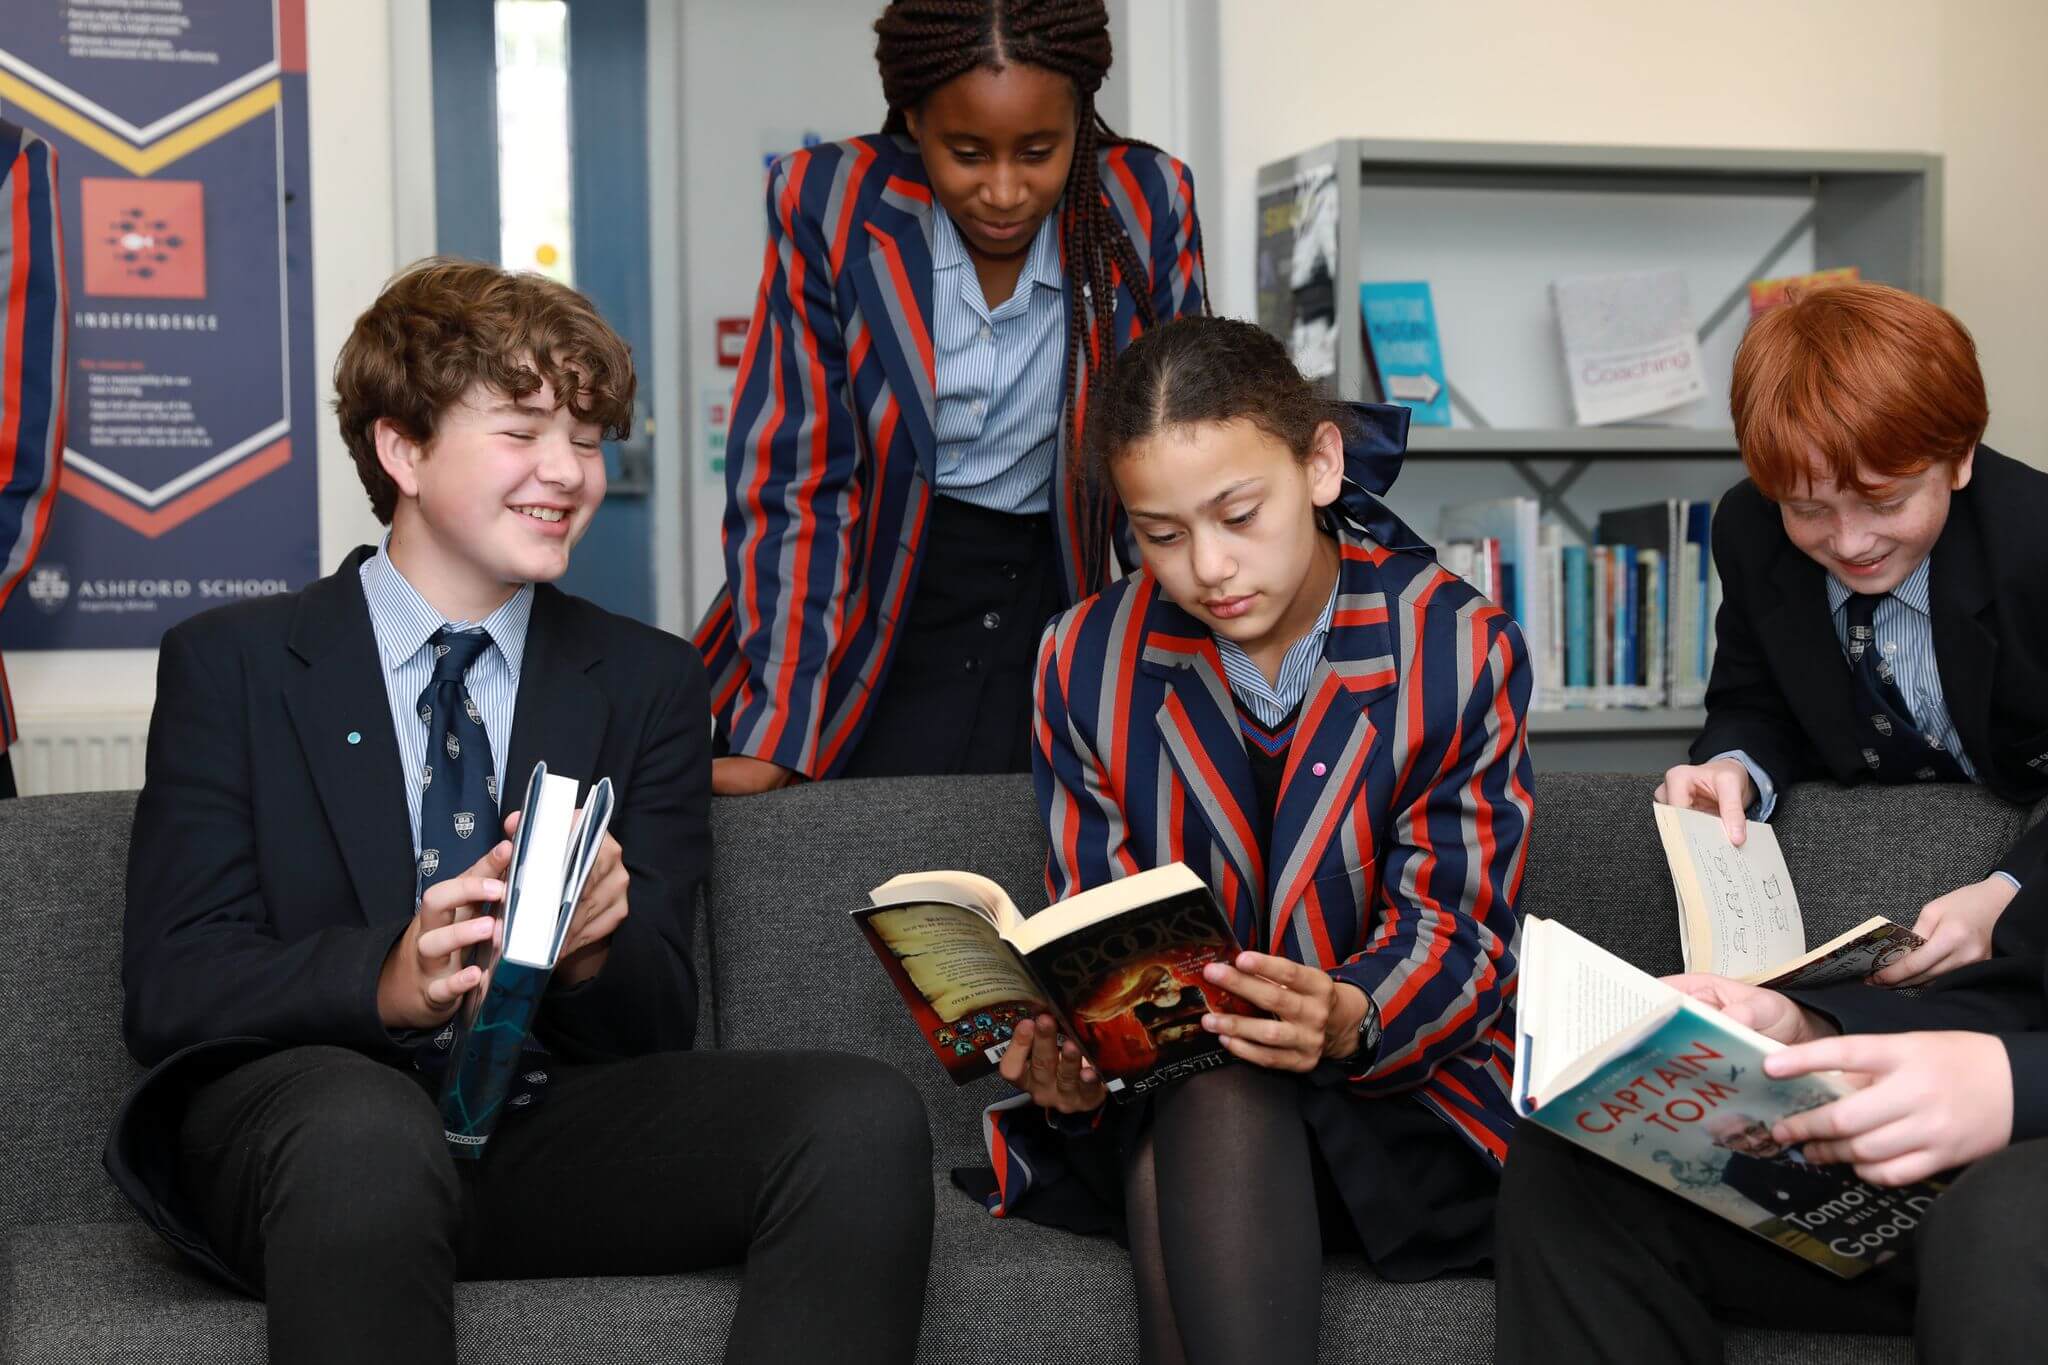 4 UK boarding schools, 4 pathways to a lifetime of success